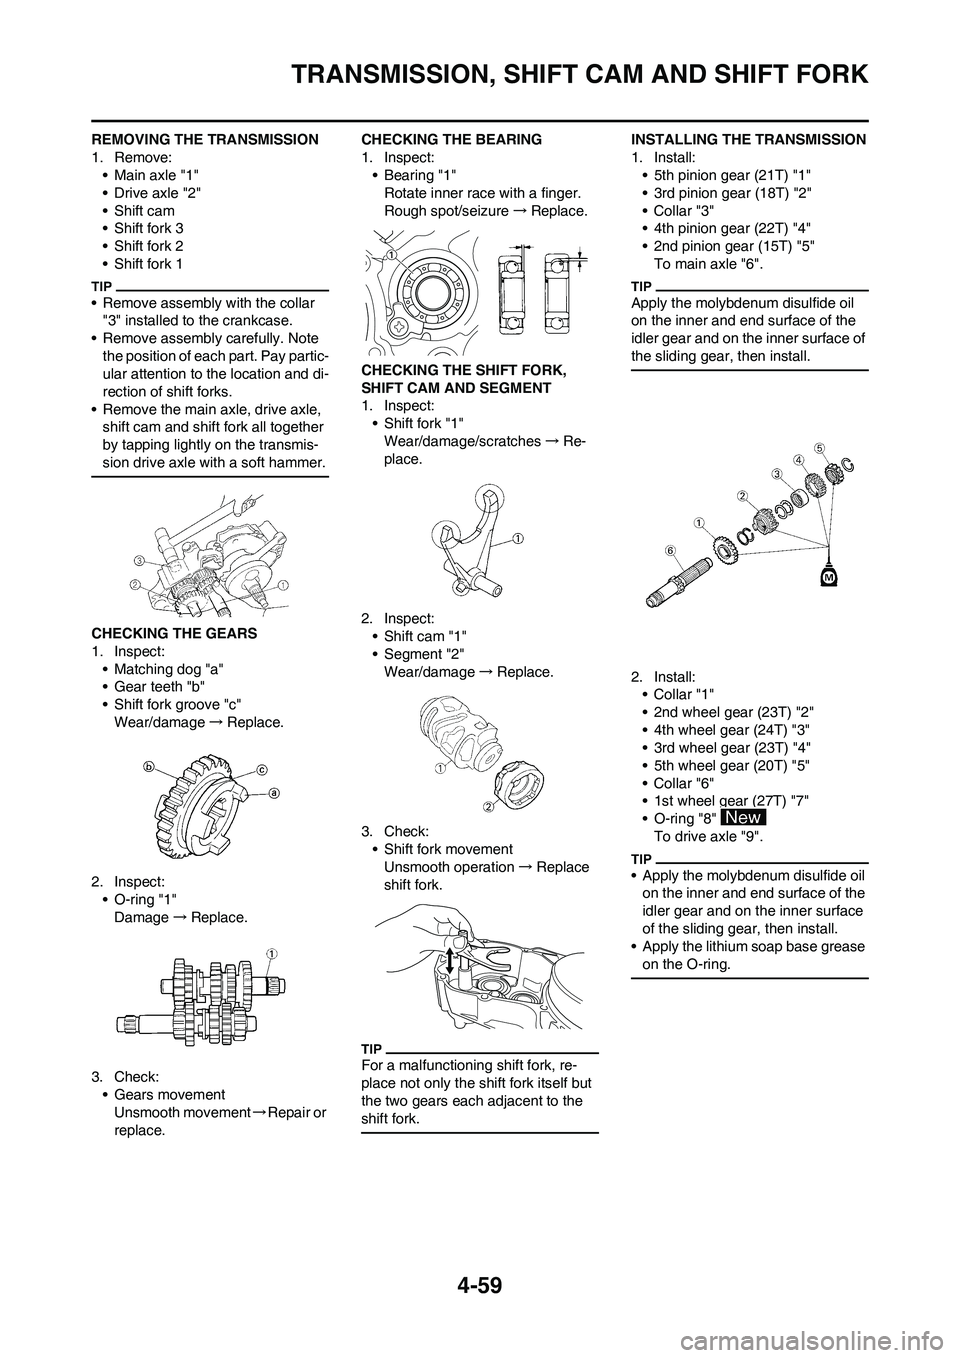 YAMAHA YZ450F 2011  Owners Manual 4-59
TRANSMISSION, SHIFT CAM AND SHIFT FORK
REMOVING THE TRANSMISSION
1. Remove:
• Main axle "1"
• Drive axle "2"
• Shift cam
• Shift fork 3
• Shift fork 2
• Shift fork 1
• Remove assemb